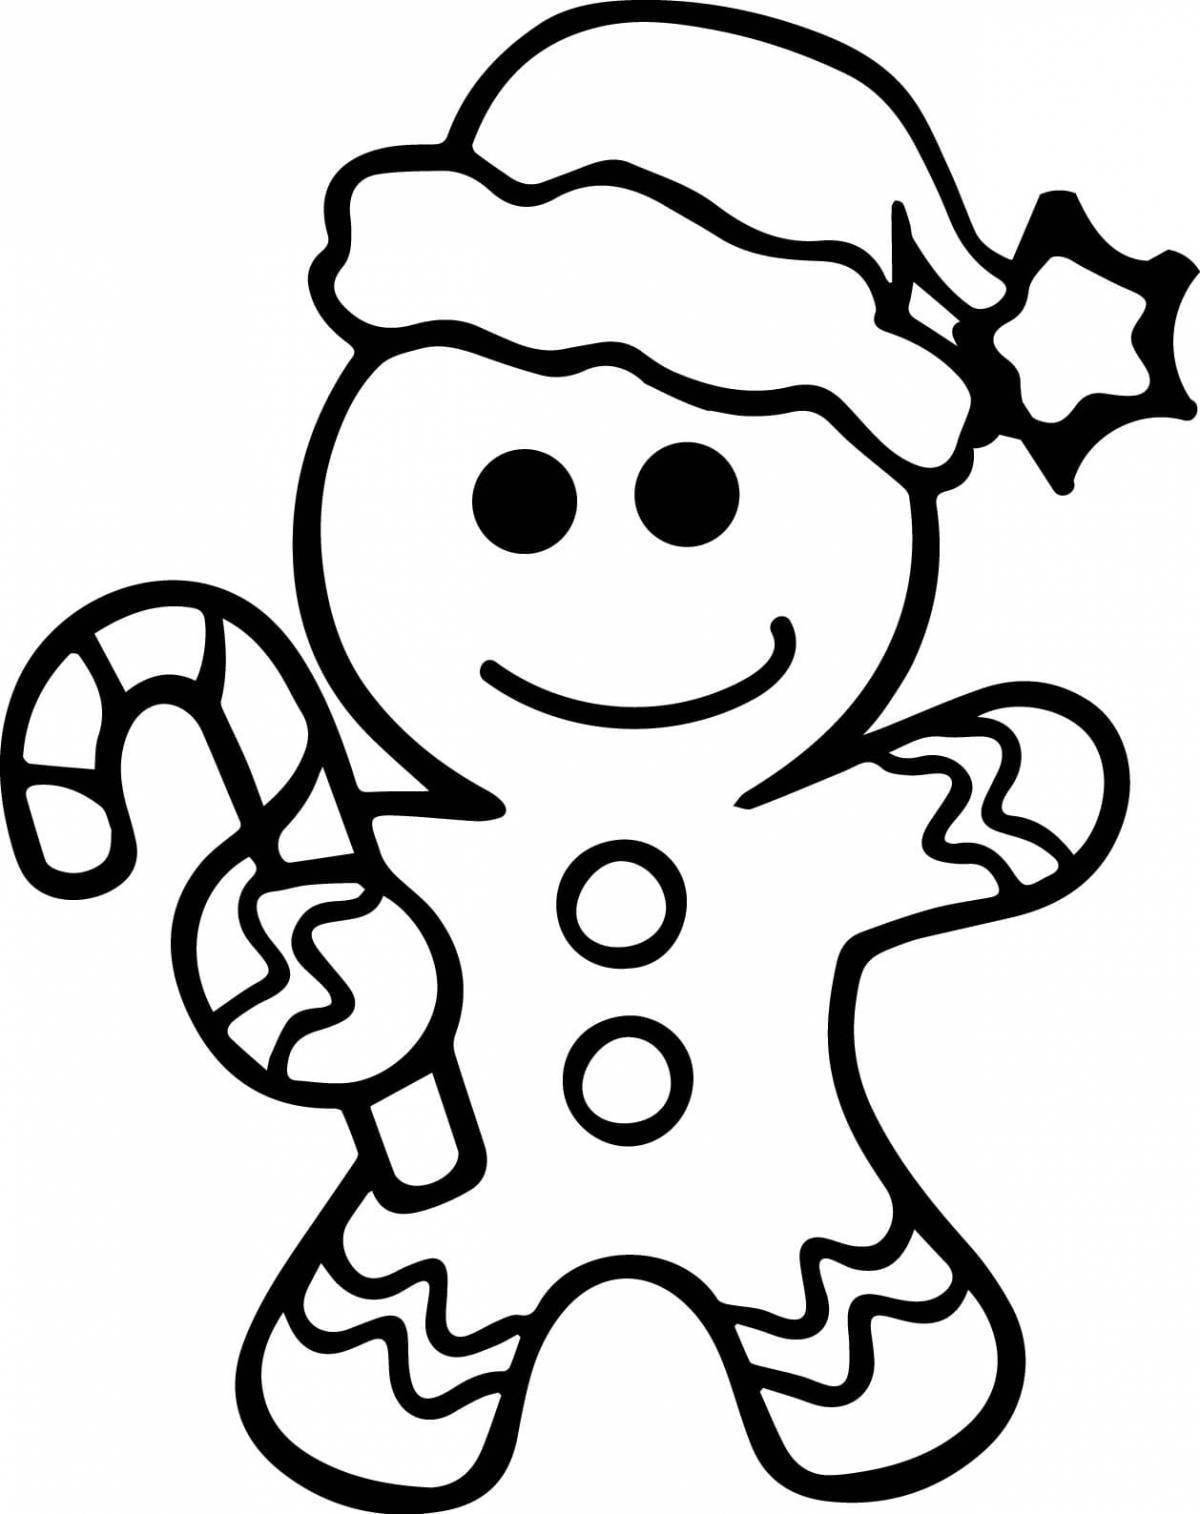 Playful little Christmas coloring book